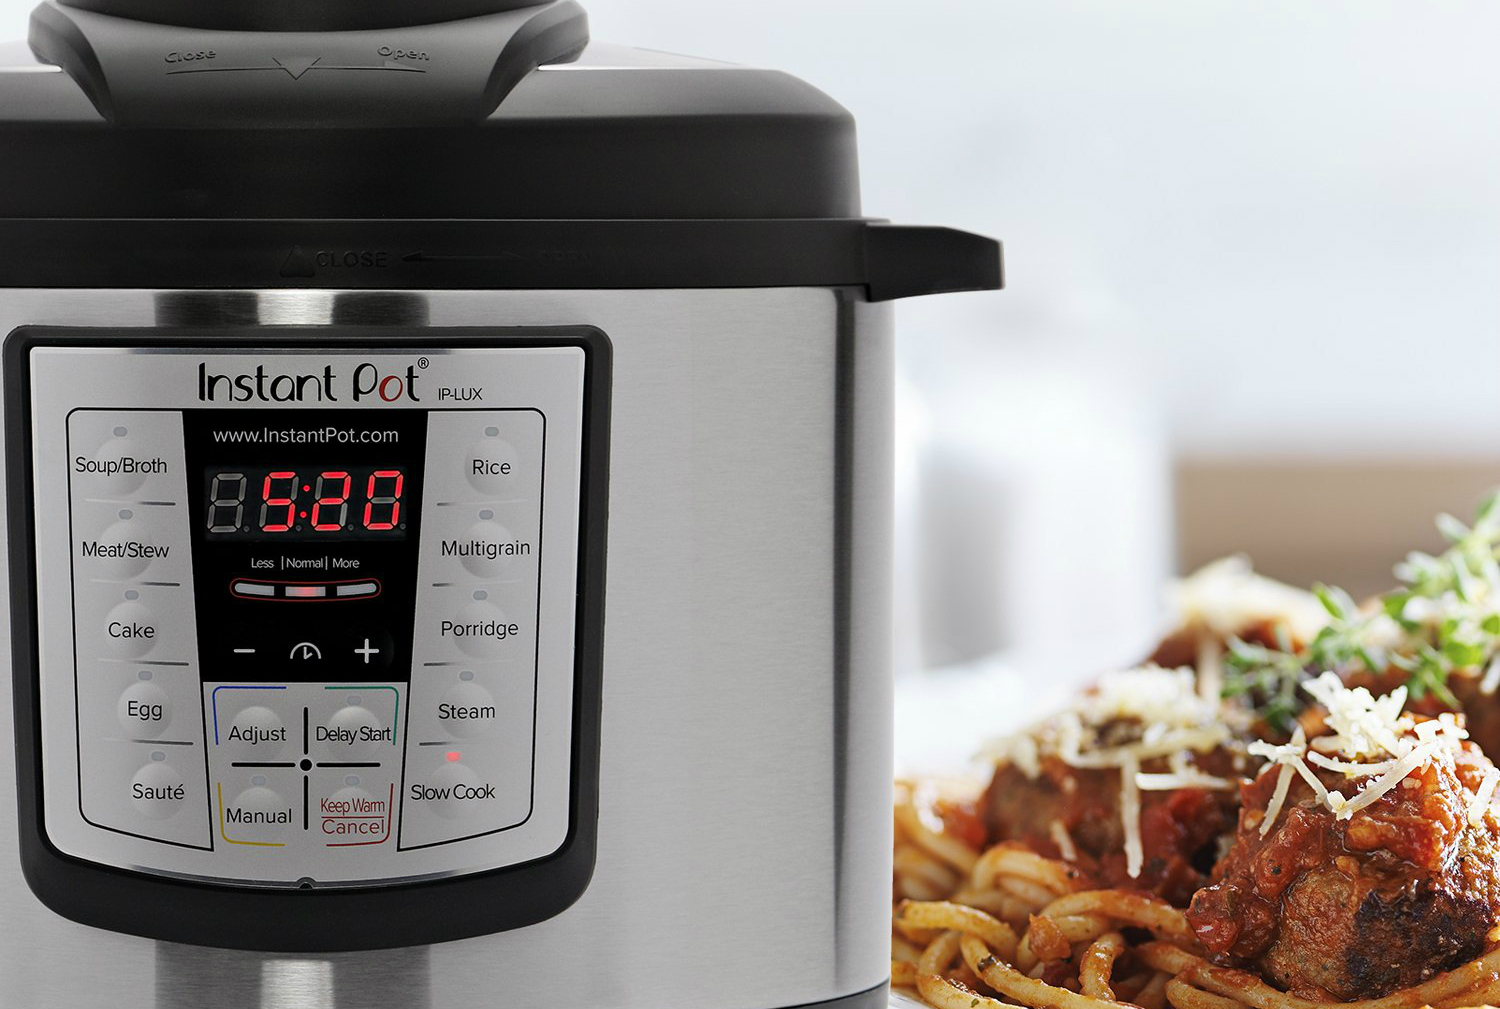 Axes Price on Instant Pot DUO80 Multi-Use Pressure Cooker